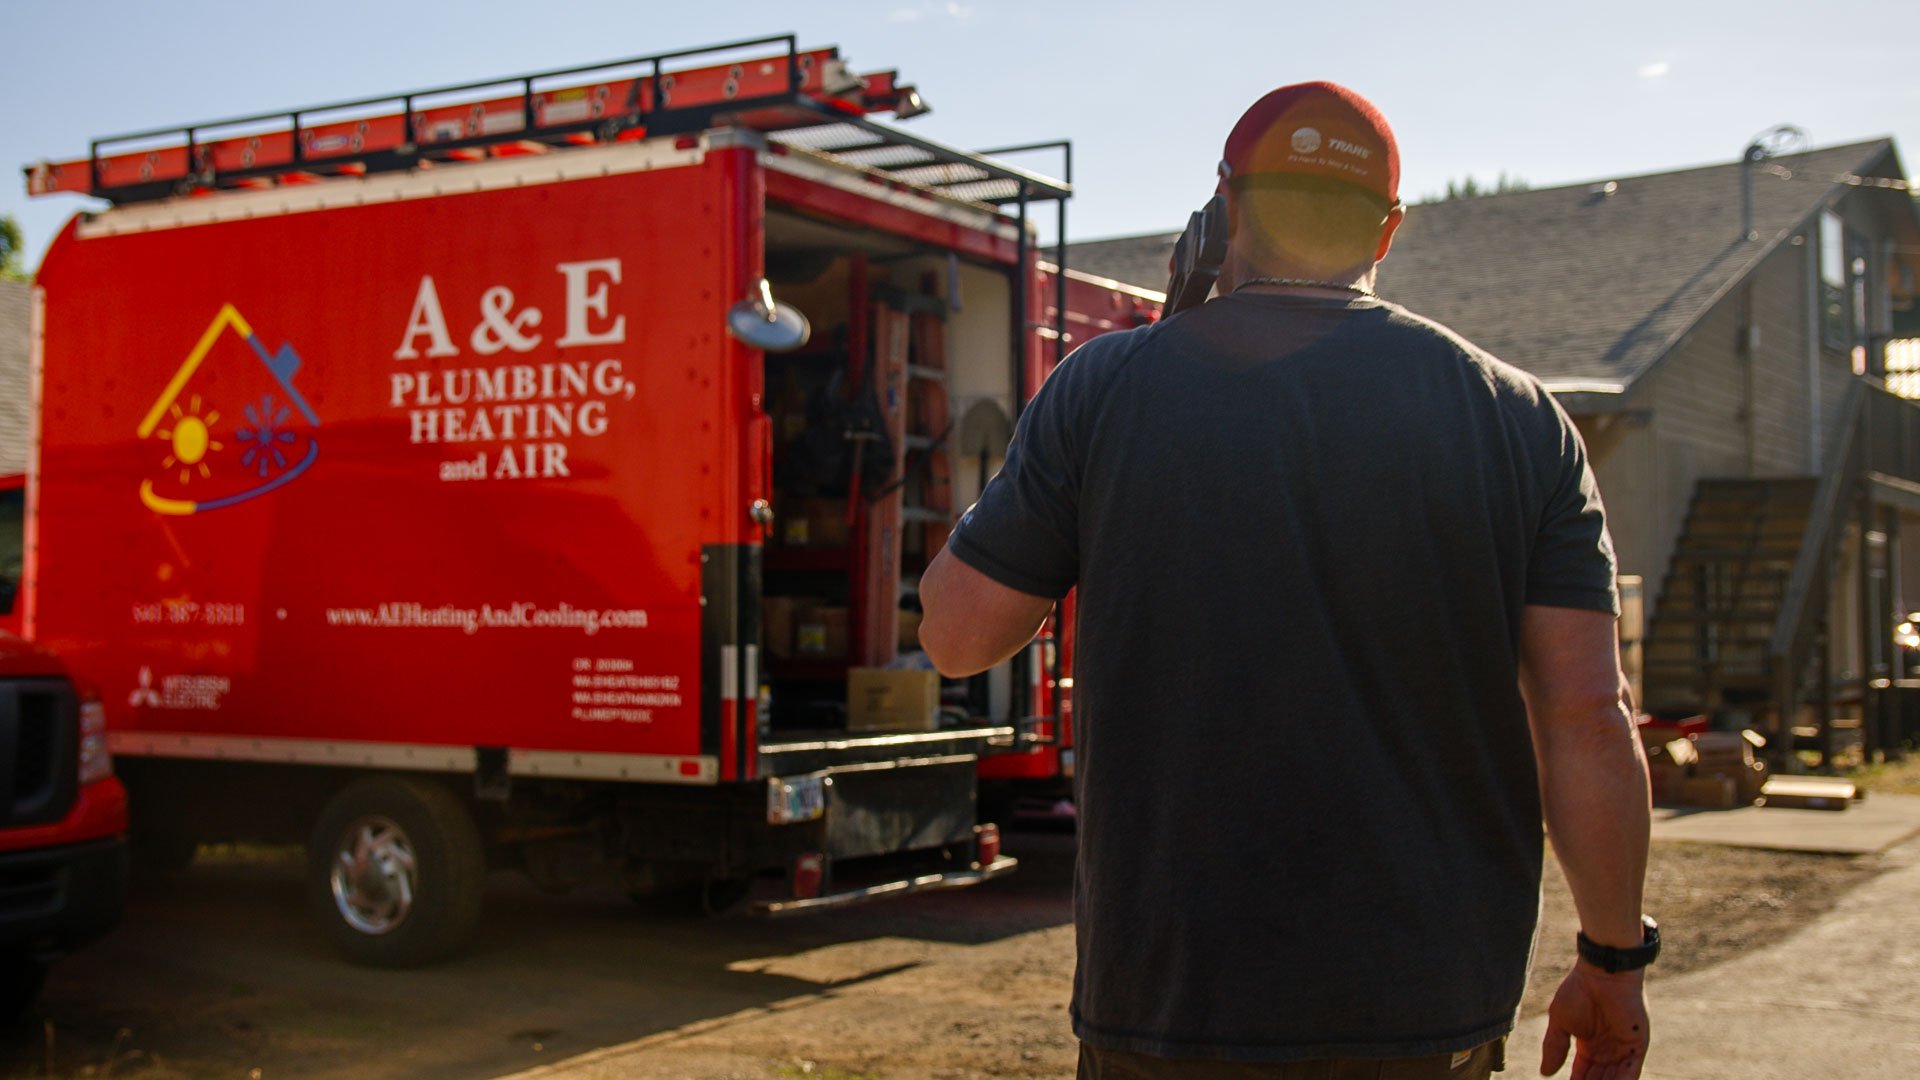 A&E Truck and Employee